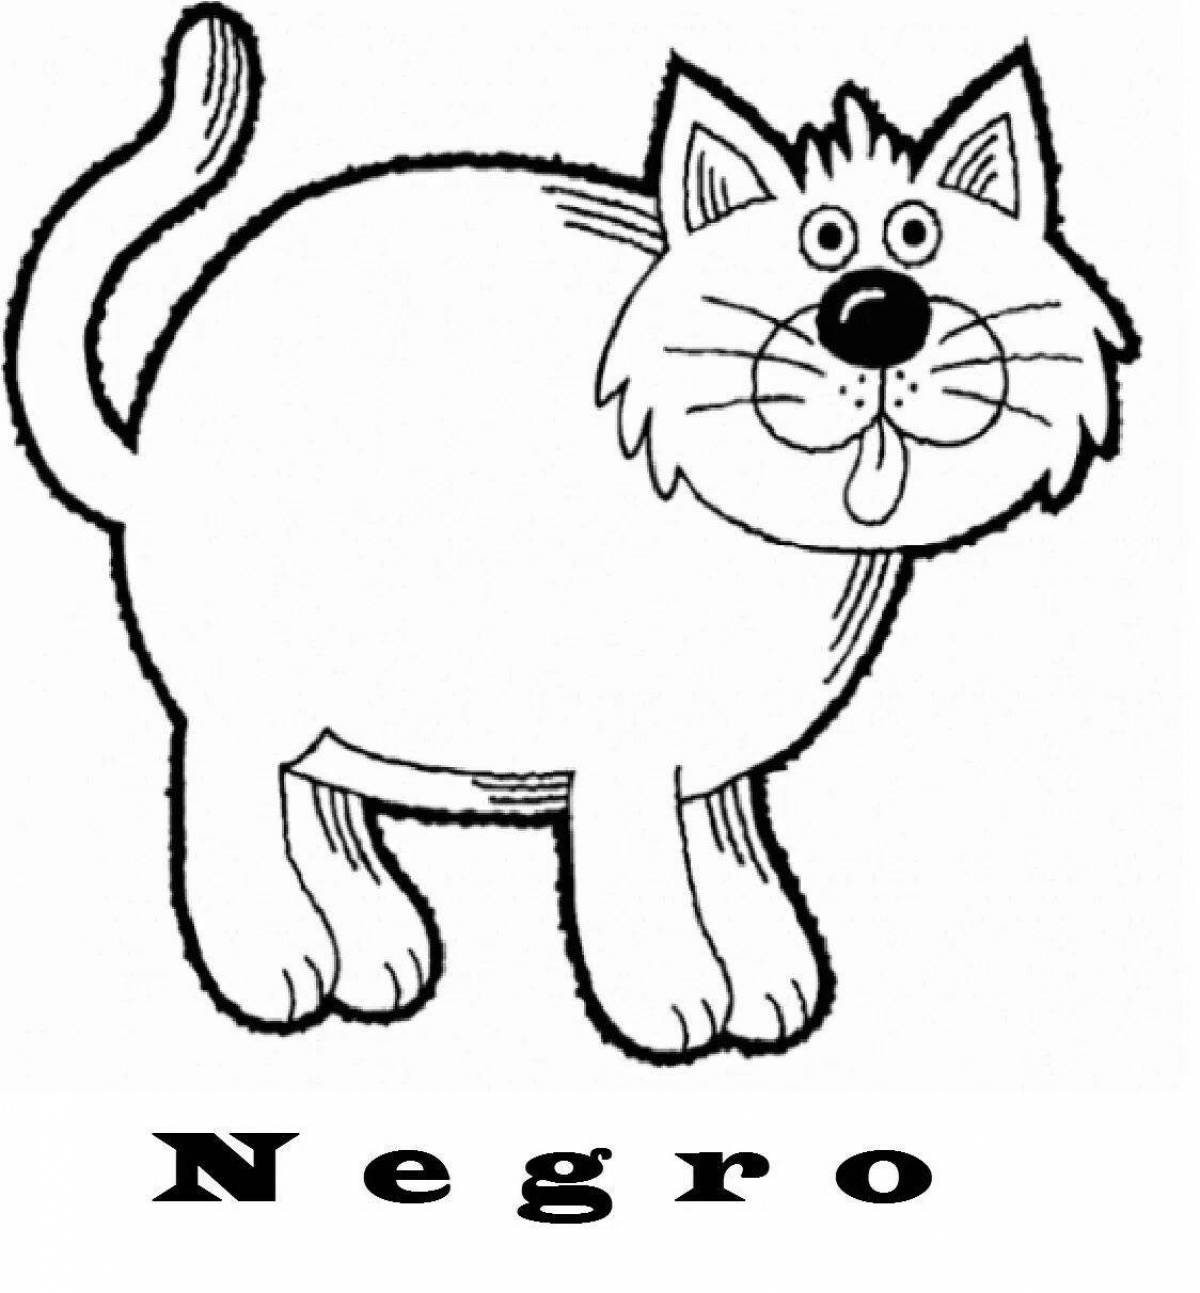 Curious cat coloring pages for kids